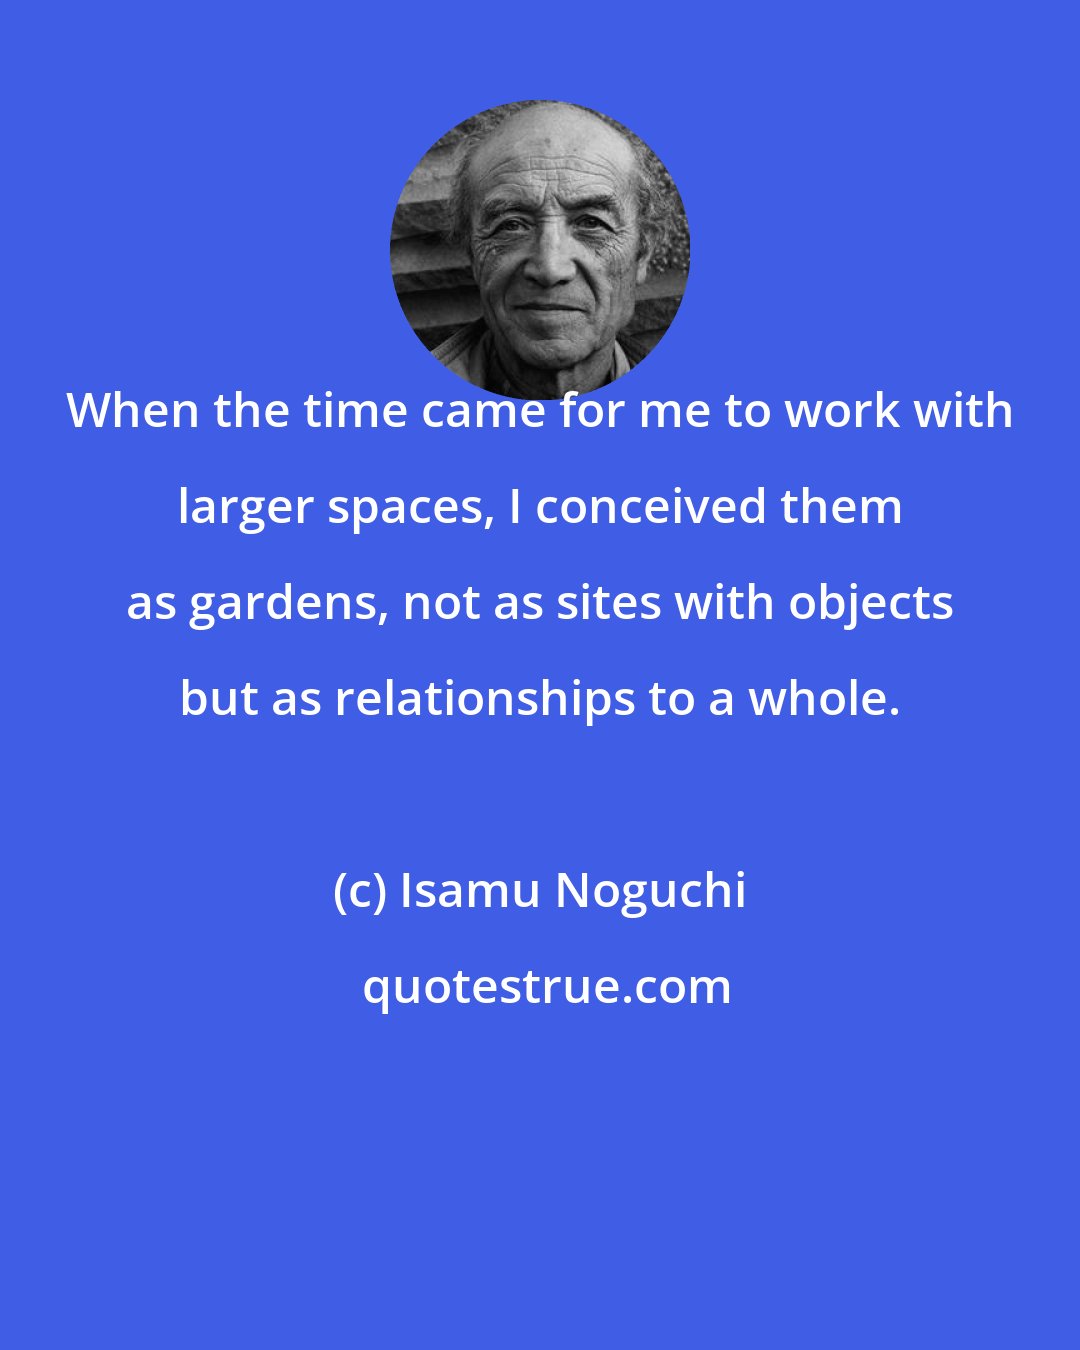 Isamu Noguchi: When the time came for me to work with larger spaces, I conceived them as gardens, not as sites with objects but as relationships to a whole.